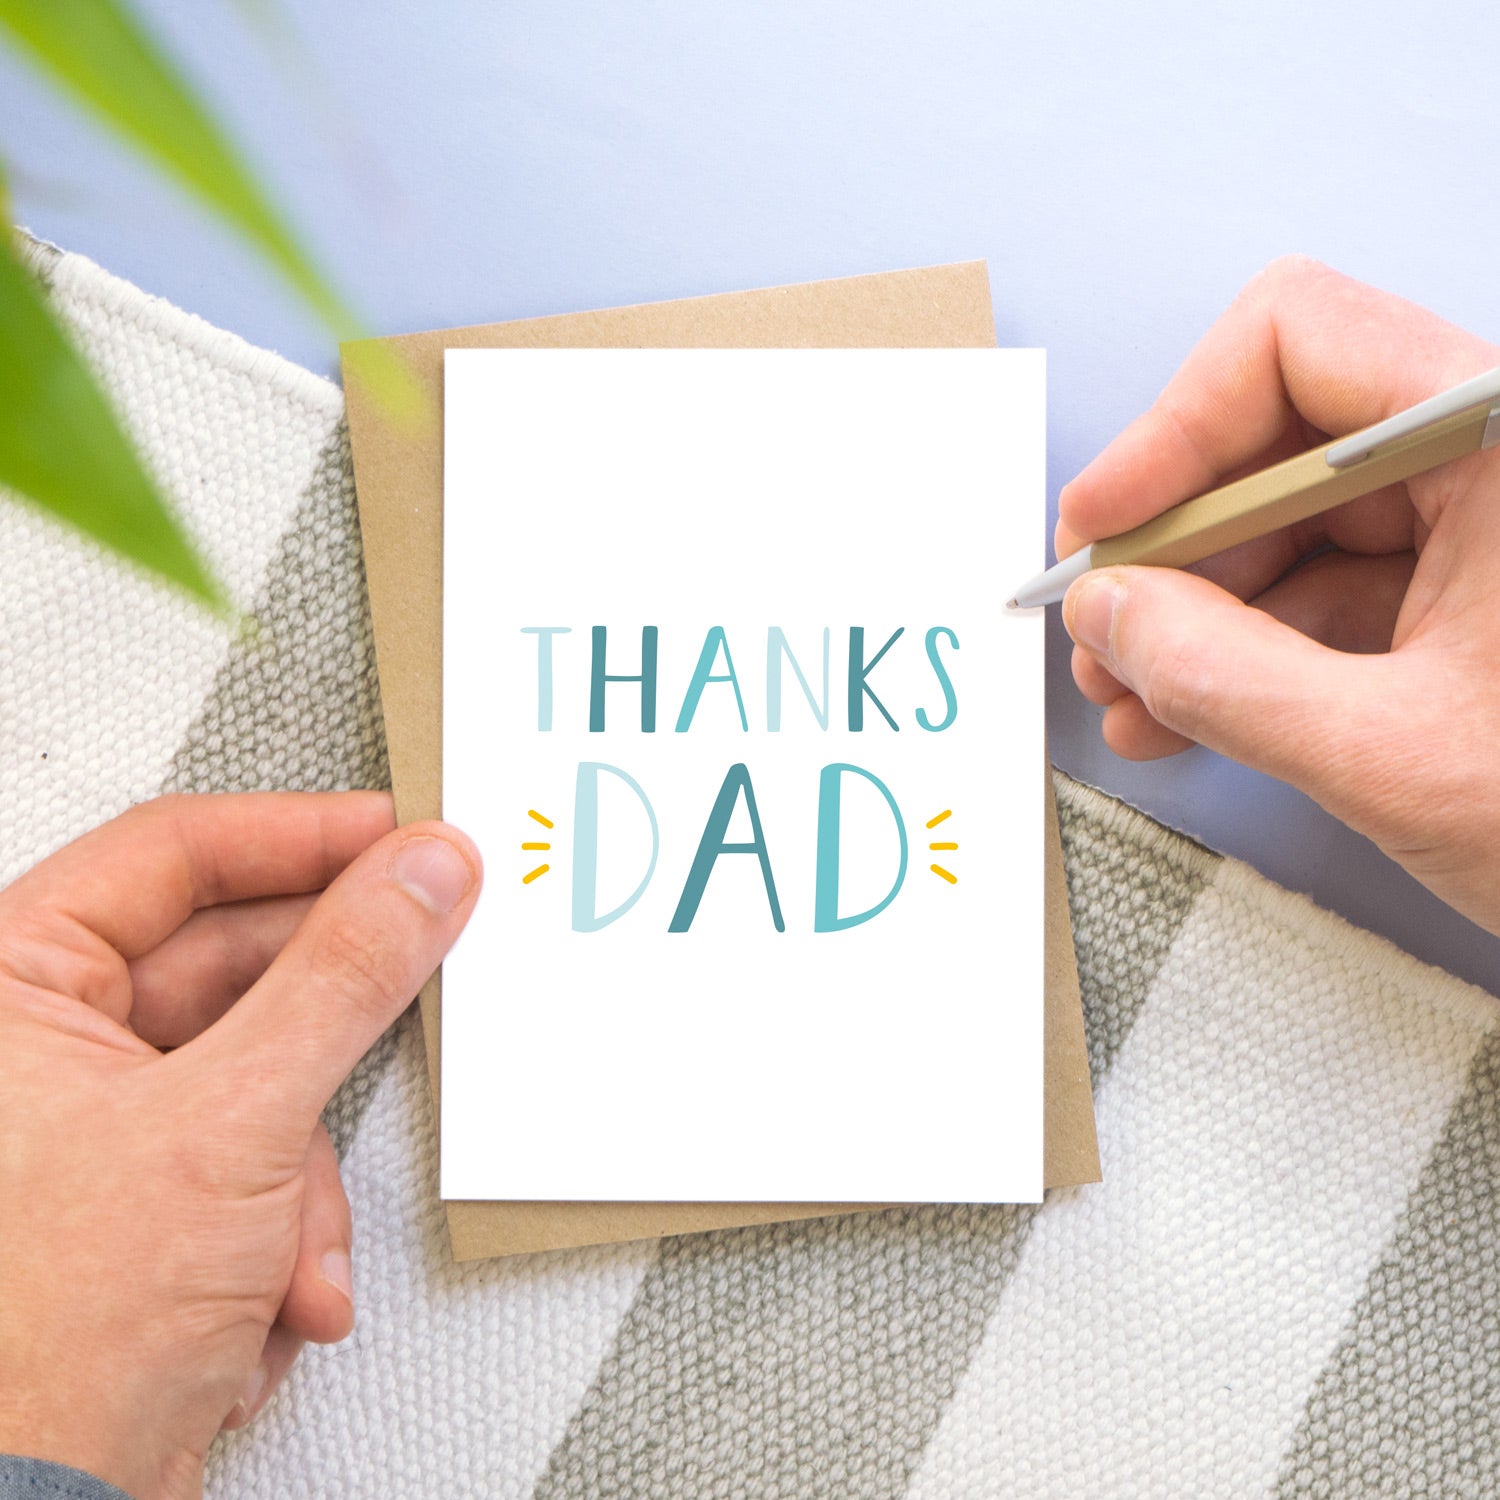 Thanks Dad! A simple typographic card being held by a man on a grey, white and blue background. The text is in varying shades of blue and with a pop of yellow around the word 'dad'.